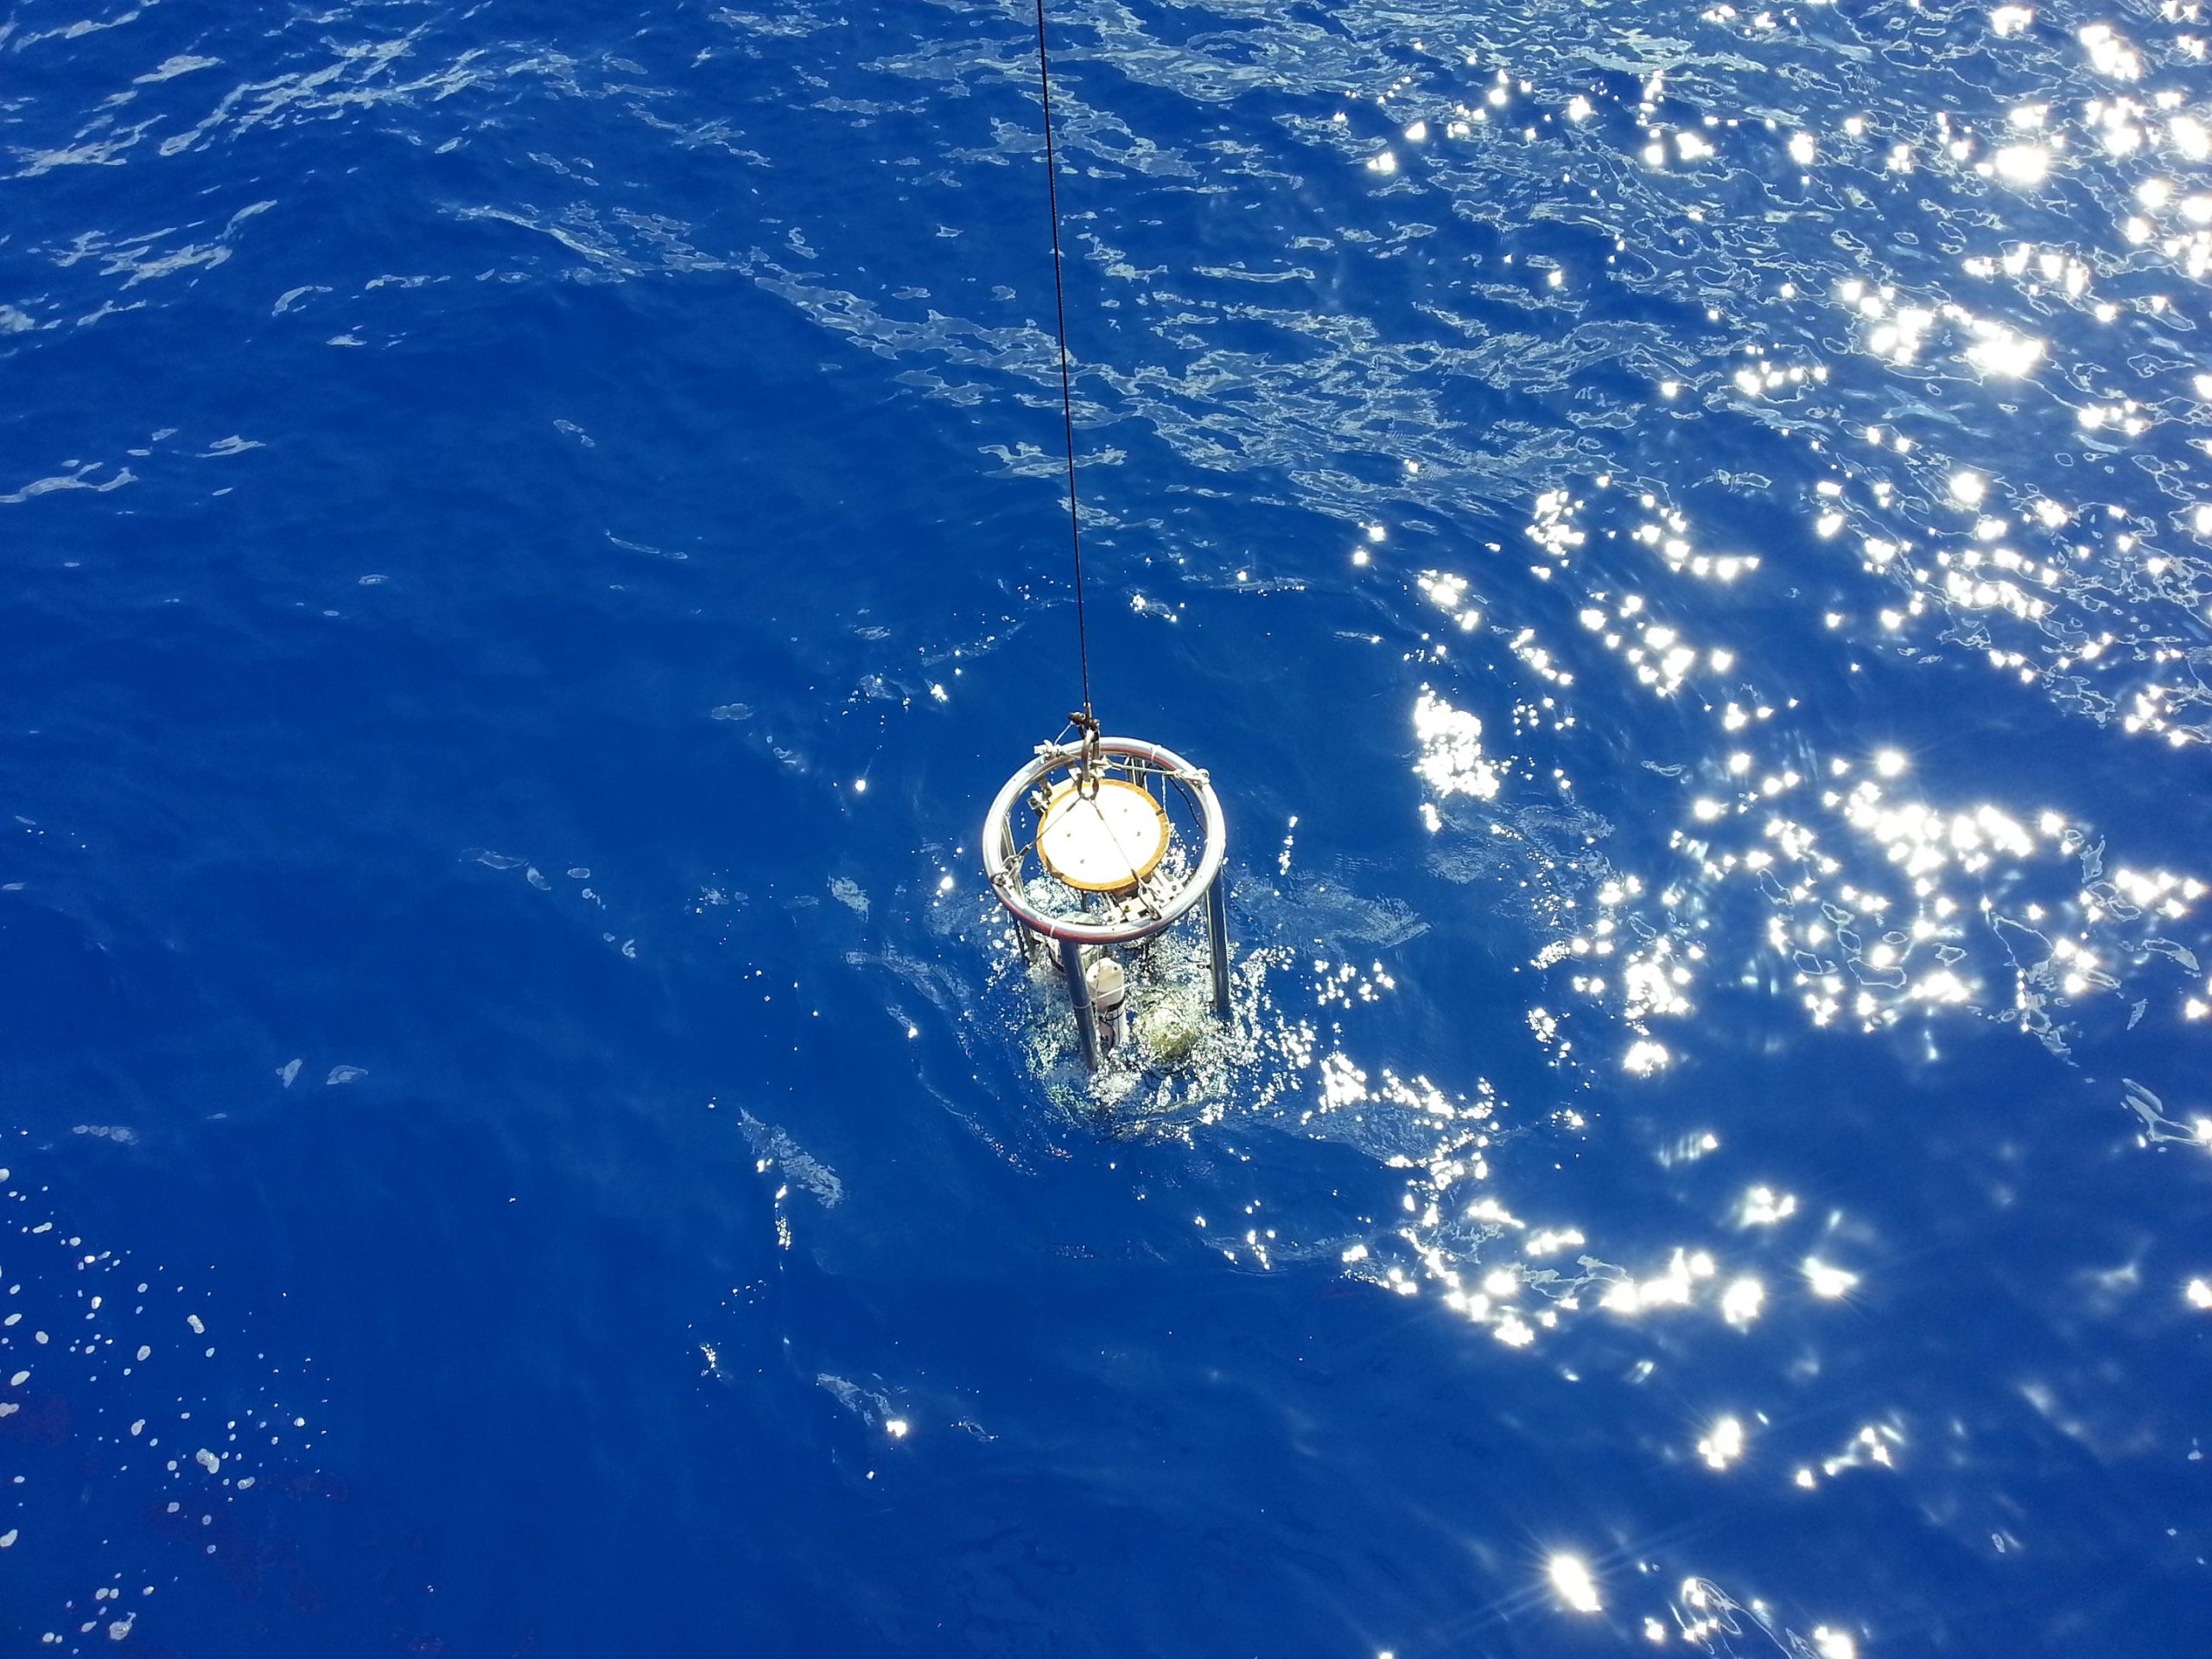 Secchi Disks Lowered Into Water To Measure Phytoplankton Abundance scaled